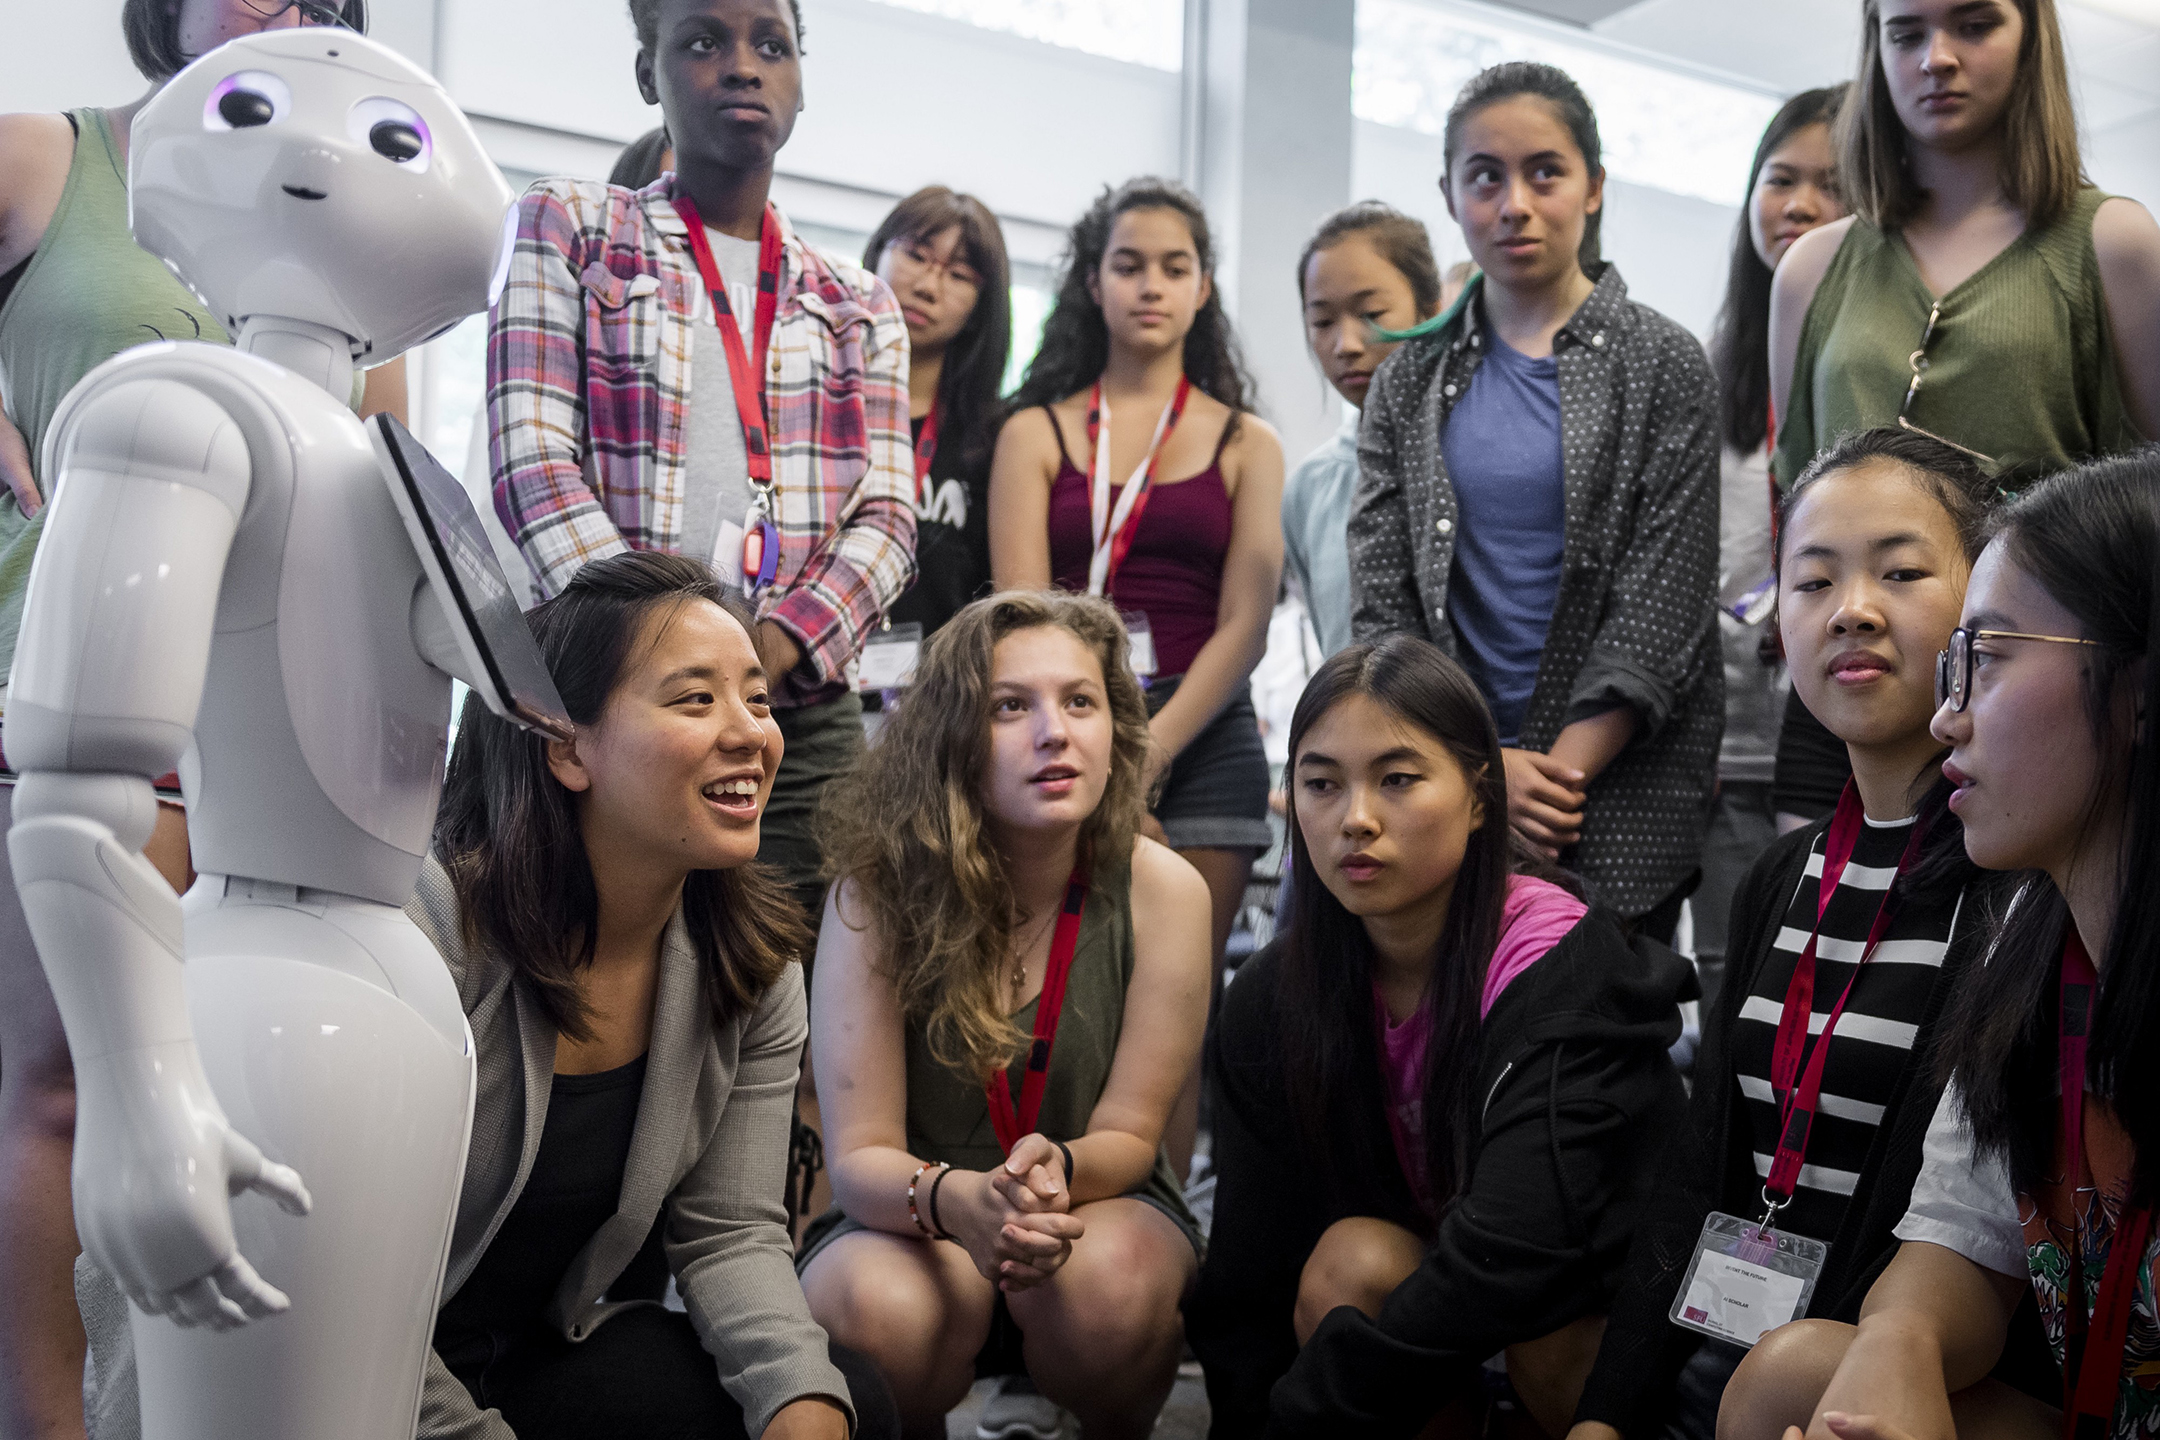 A group of a dozen female high school students listen to an adult woman talk about an human-looking artificial-intelligence-based robot